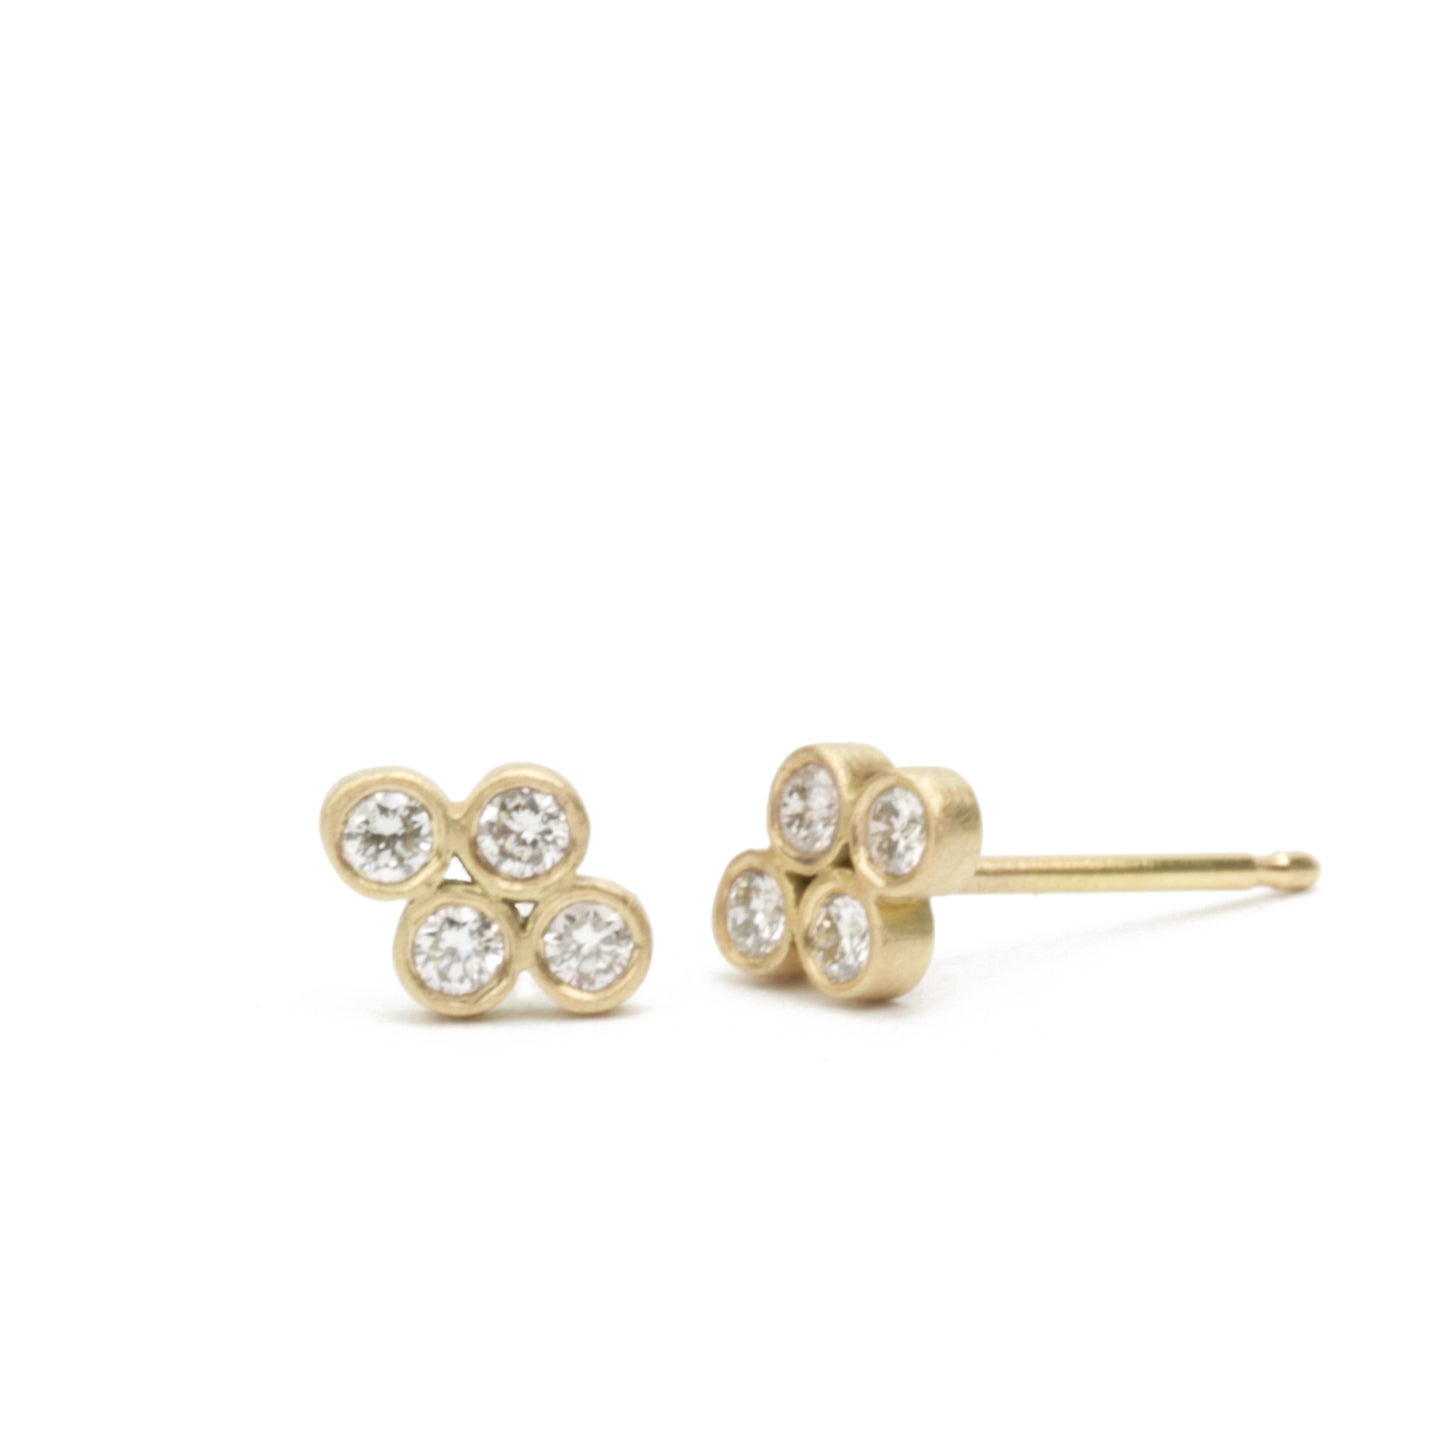 Teeny Quad Stud Earrings with diamonds, front and side views